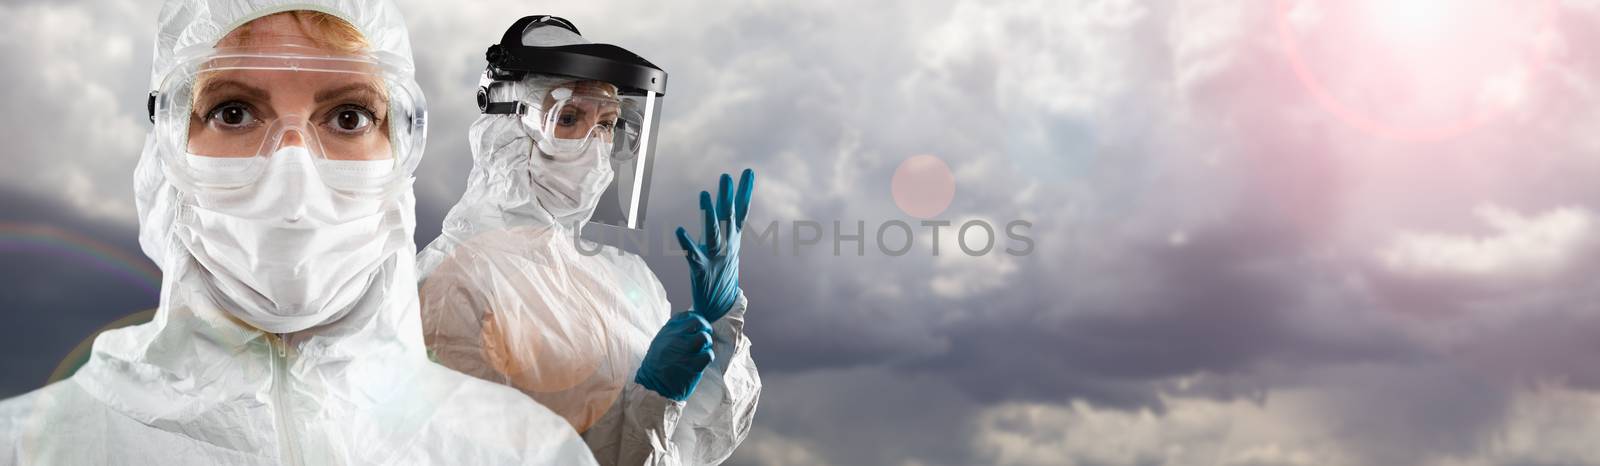 Doctor or Nurse Wearing Personal Protective Equipment Over Storm by Feverpitched